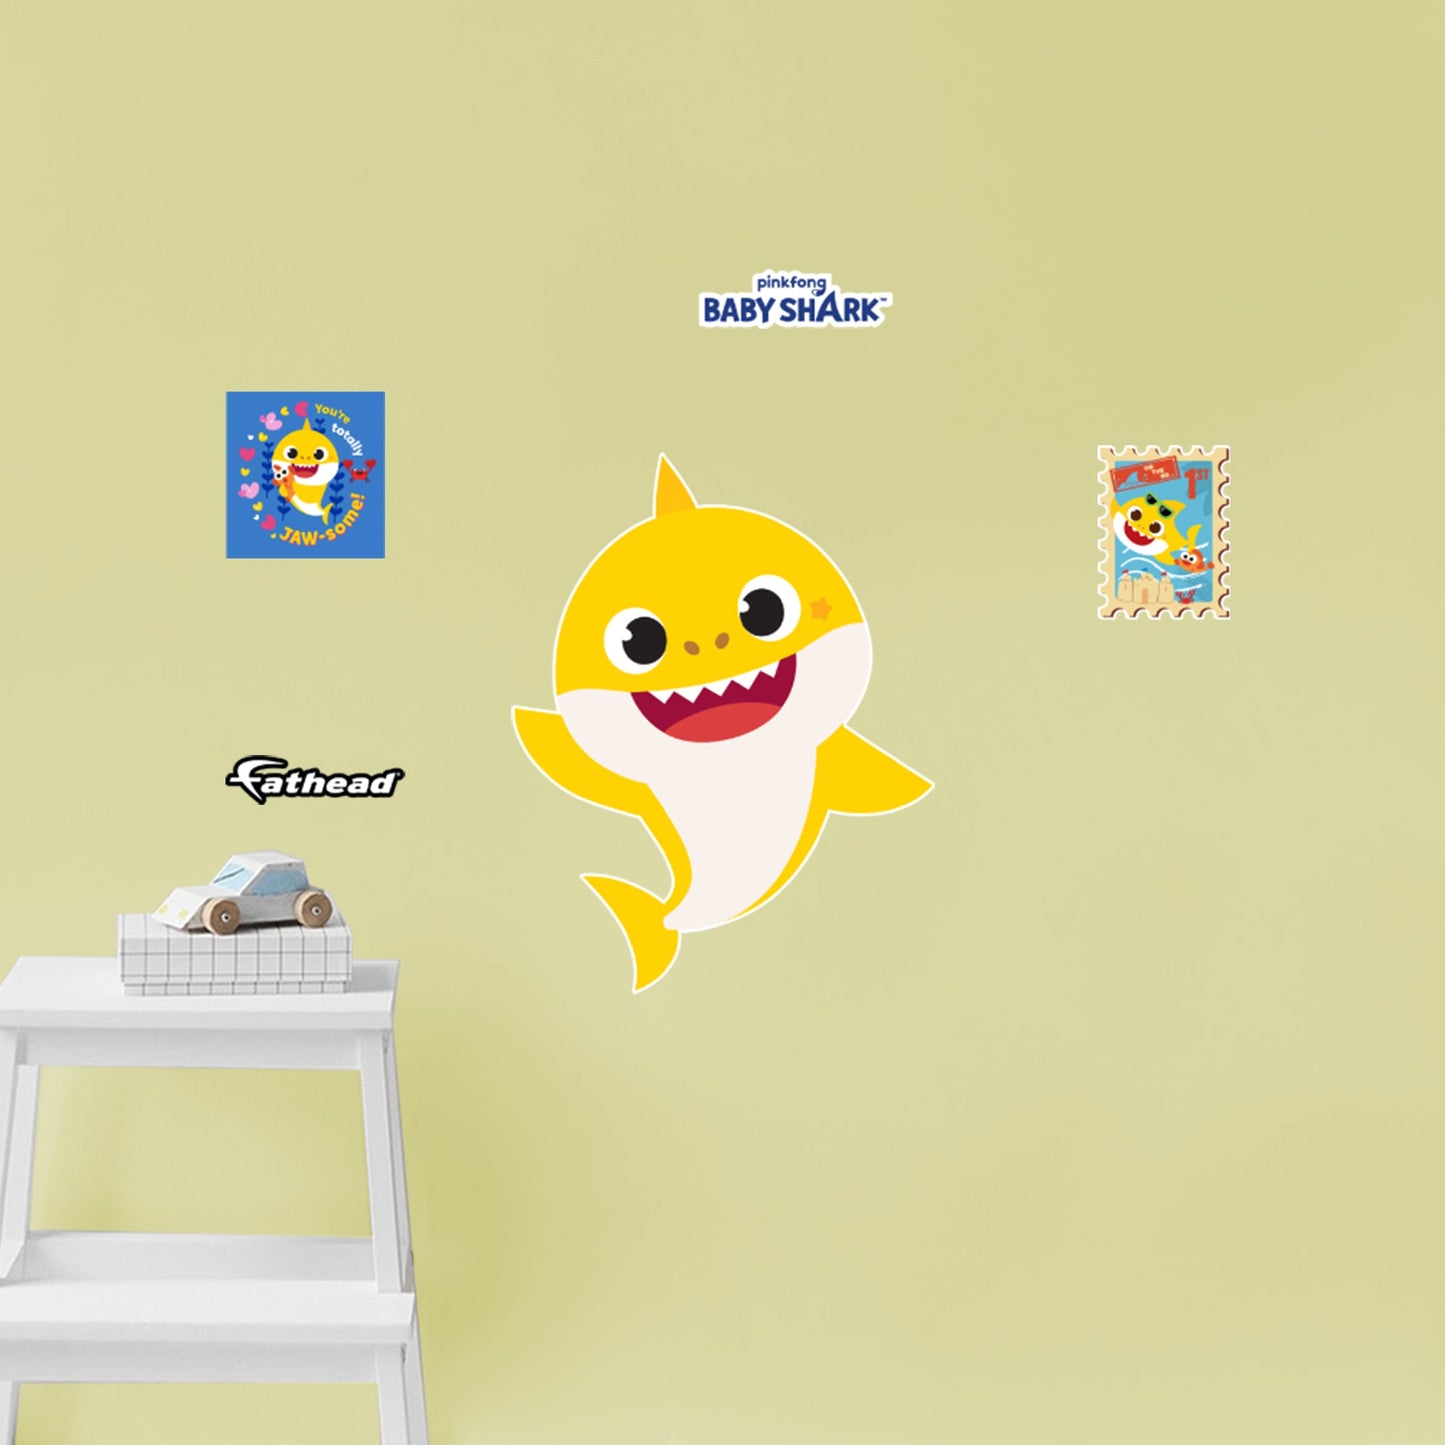 Baby Shark: Friends RealBig - Officially Licensed Nickelodeon Removable Adhesive Decal